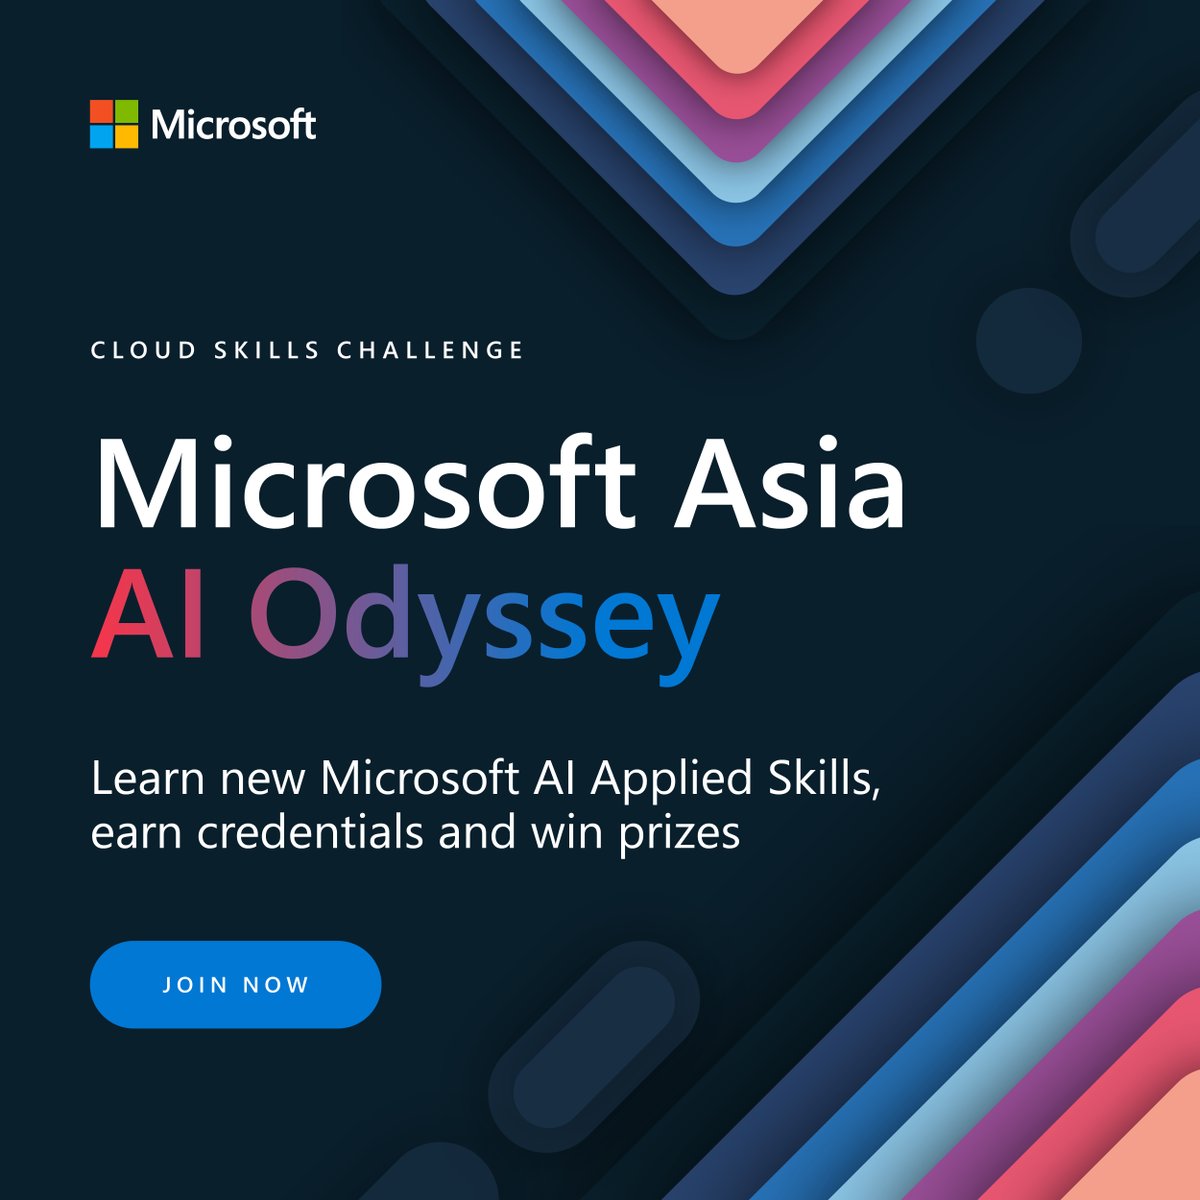 The Microsoft AI Odyssey is seeing developers across the region gain Microsoft Applied AI Skills and earning credentials. Join your peers today to win great prizes and boost your AI expertise.
More here: msft.it/6015YpZKB
#MicrosoftAI #AsiaAIOdyssey